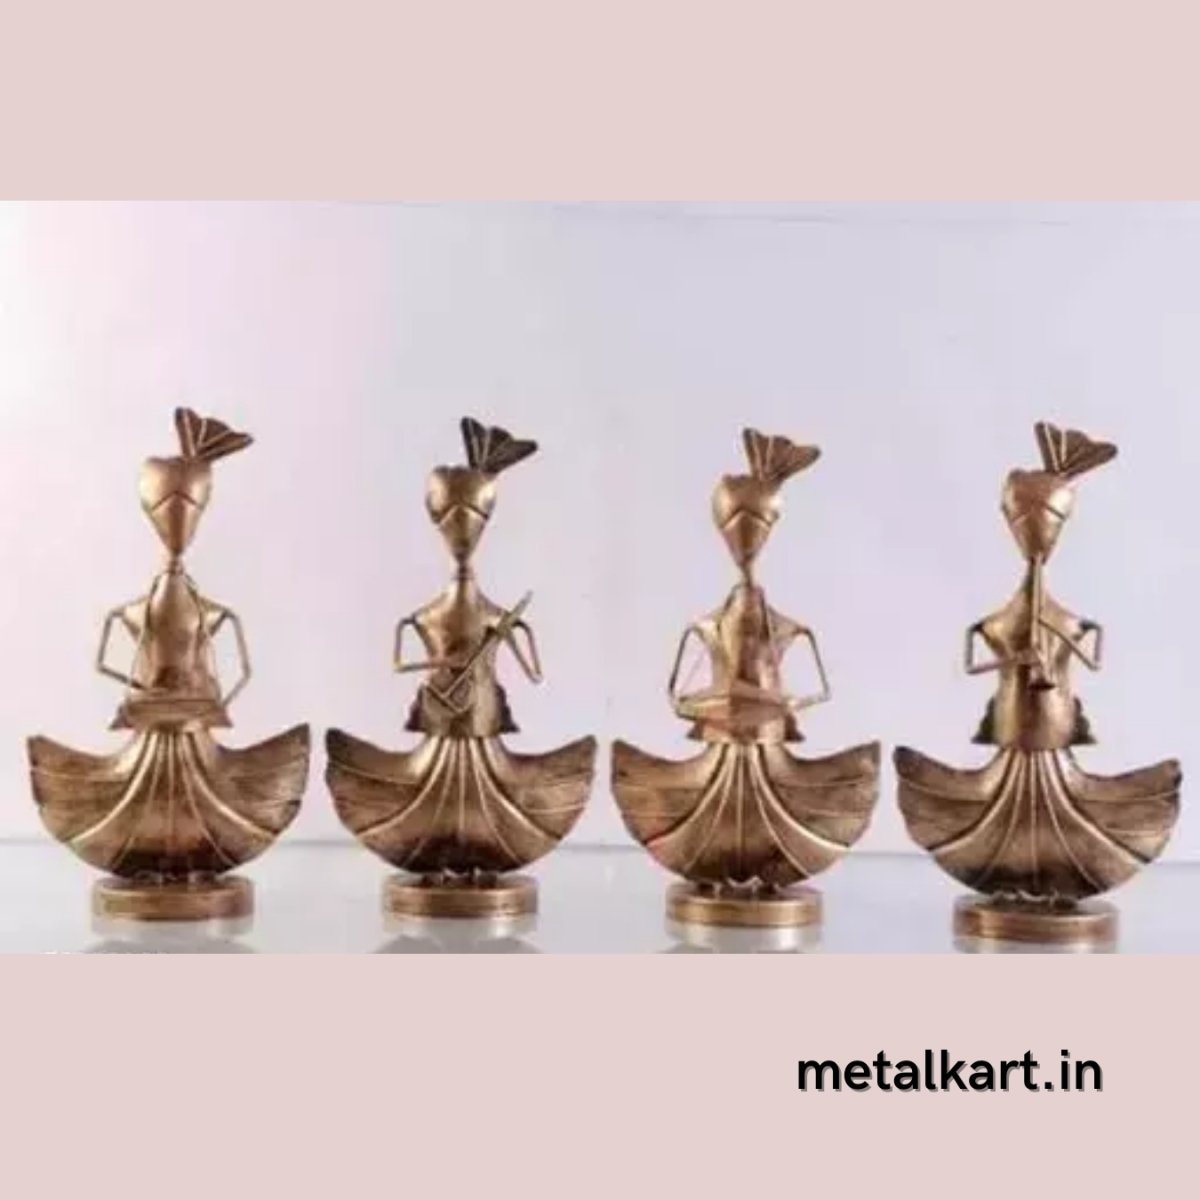 Metalkart Special 4 Traditional Sardar with instruments For living room (09*07*13 Inches approx)